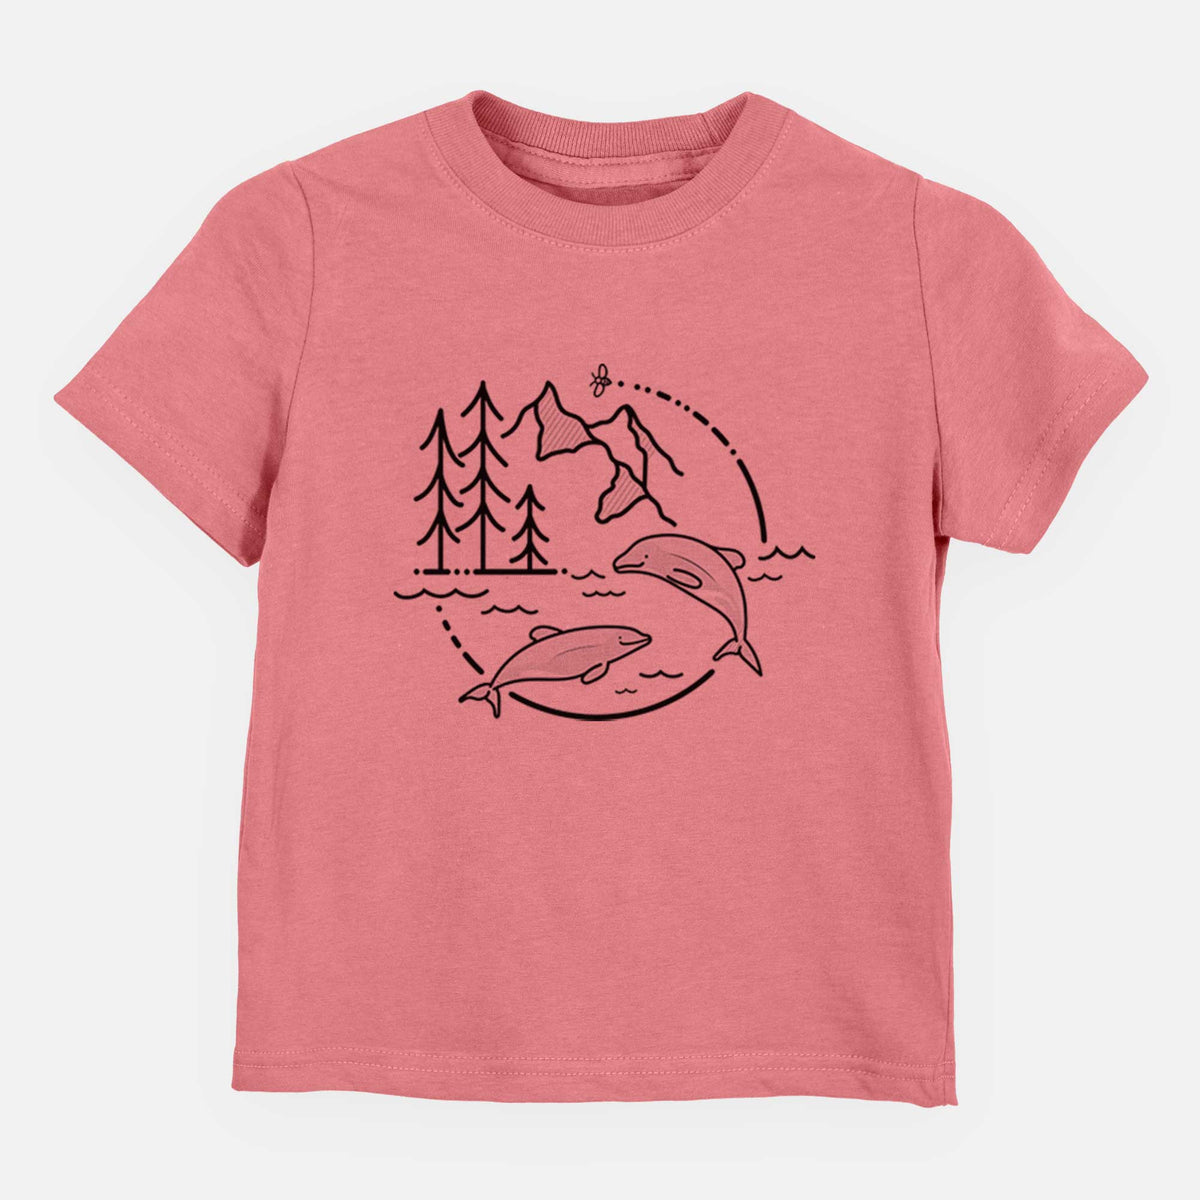 It&#39;s All Connected - Maui Dolphins - Kids Shirt